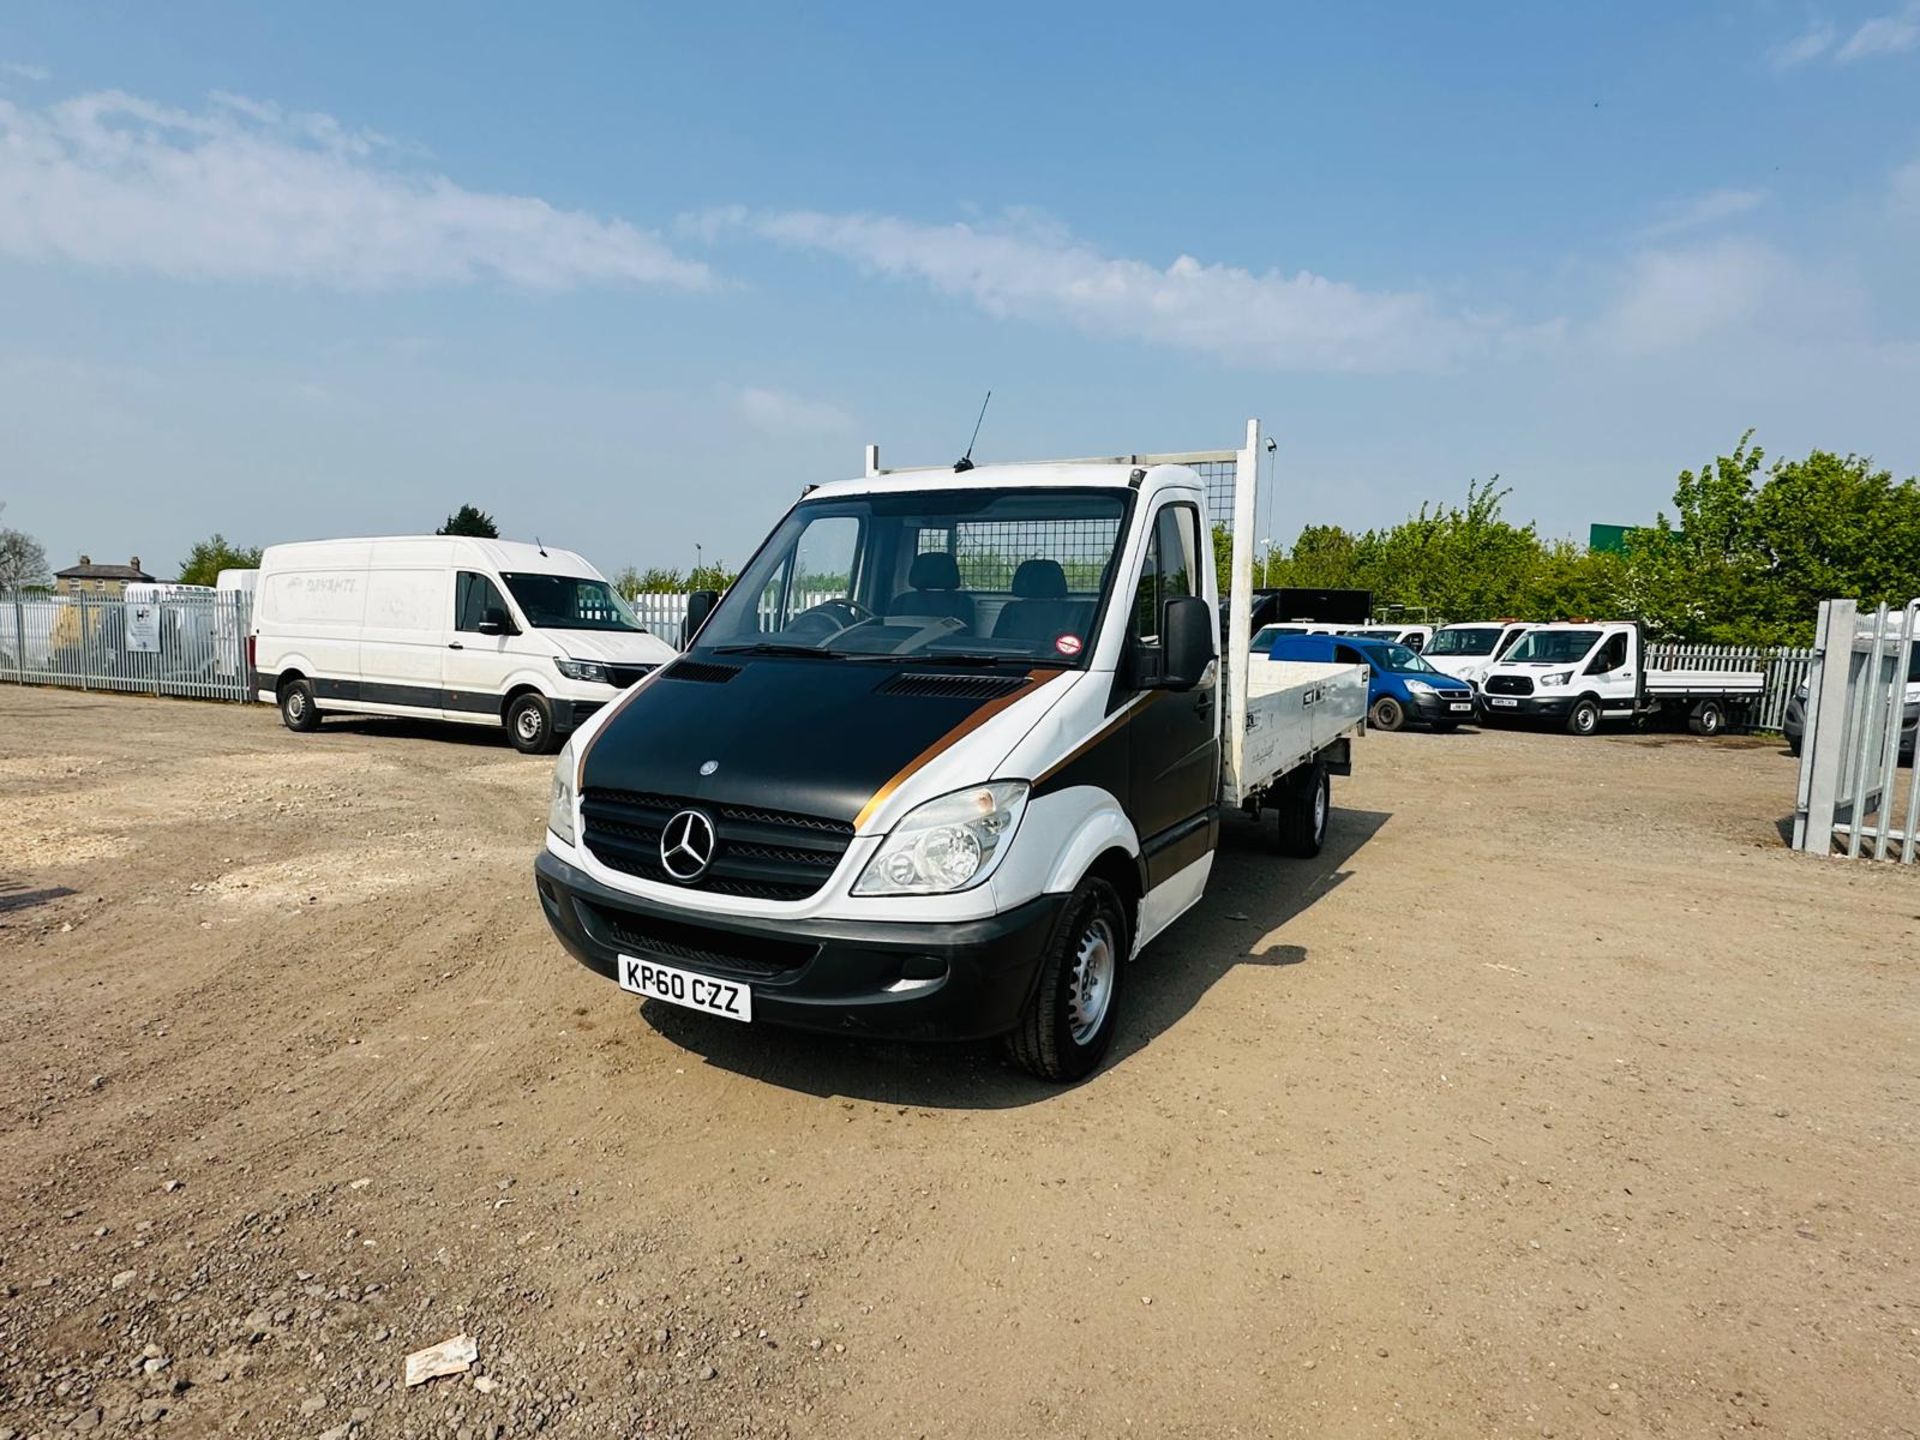 ** ON SALE ** Mercedes-Benz Sprinter 313 CDI 2.1 3.5T Alloy Double Dropside Body 2010 '60 Reg' - Image 3 of 23